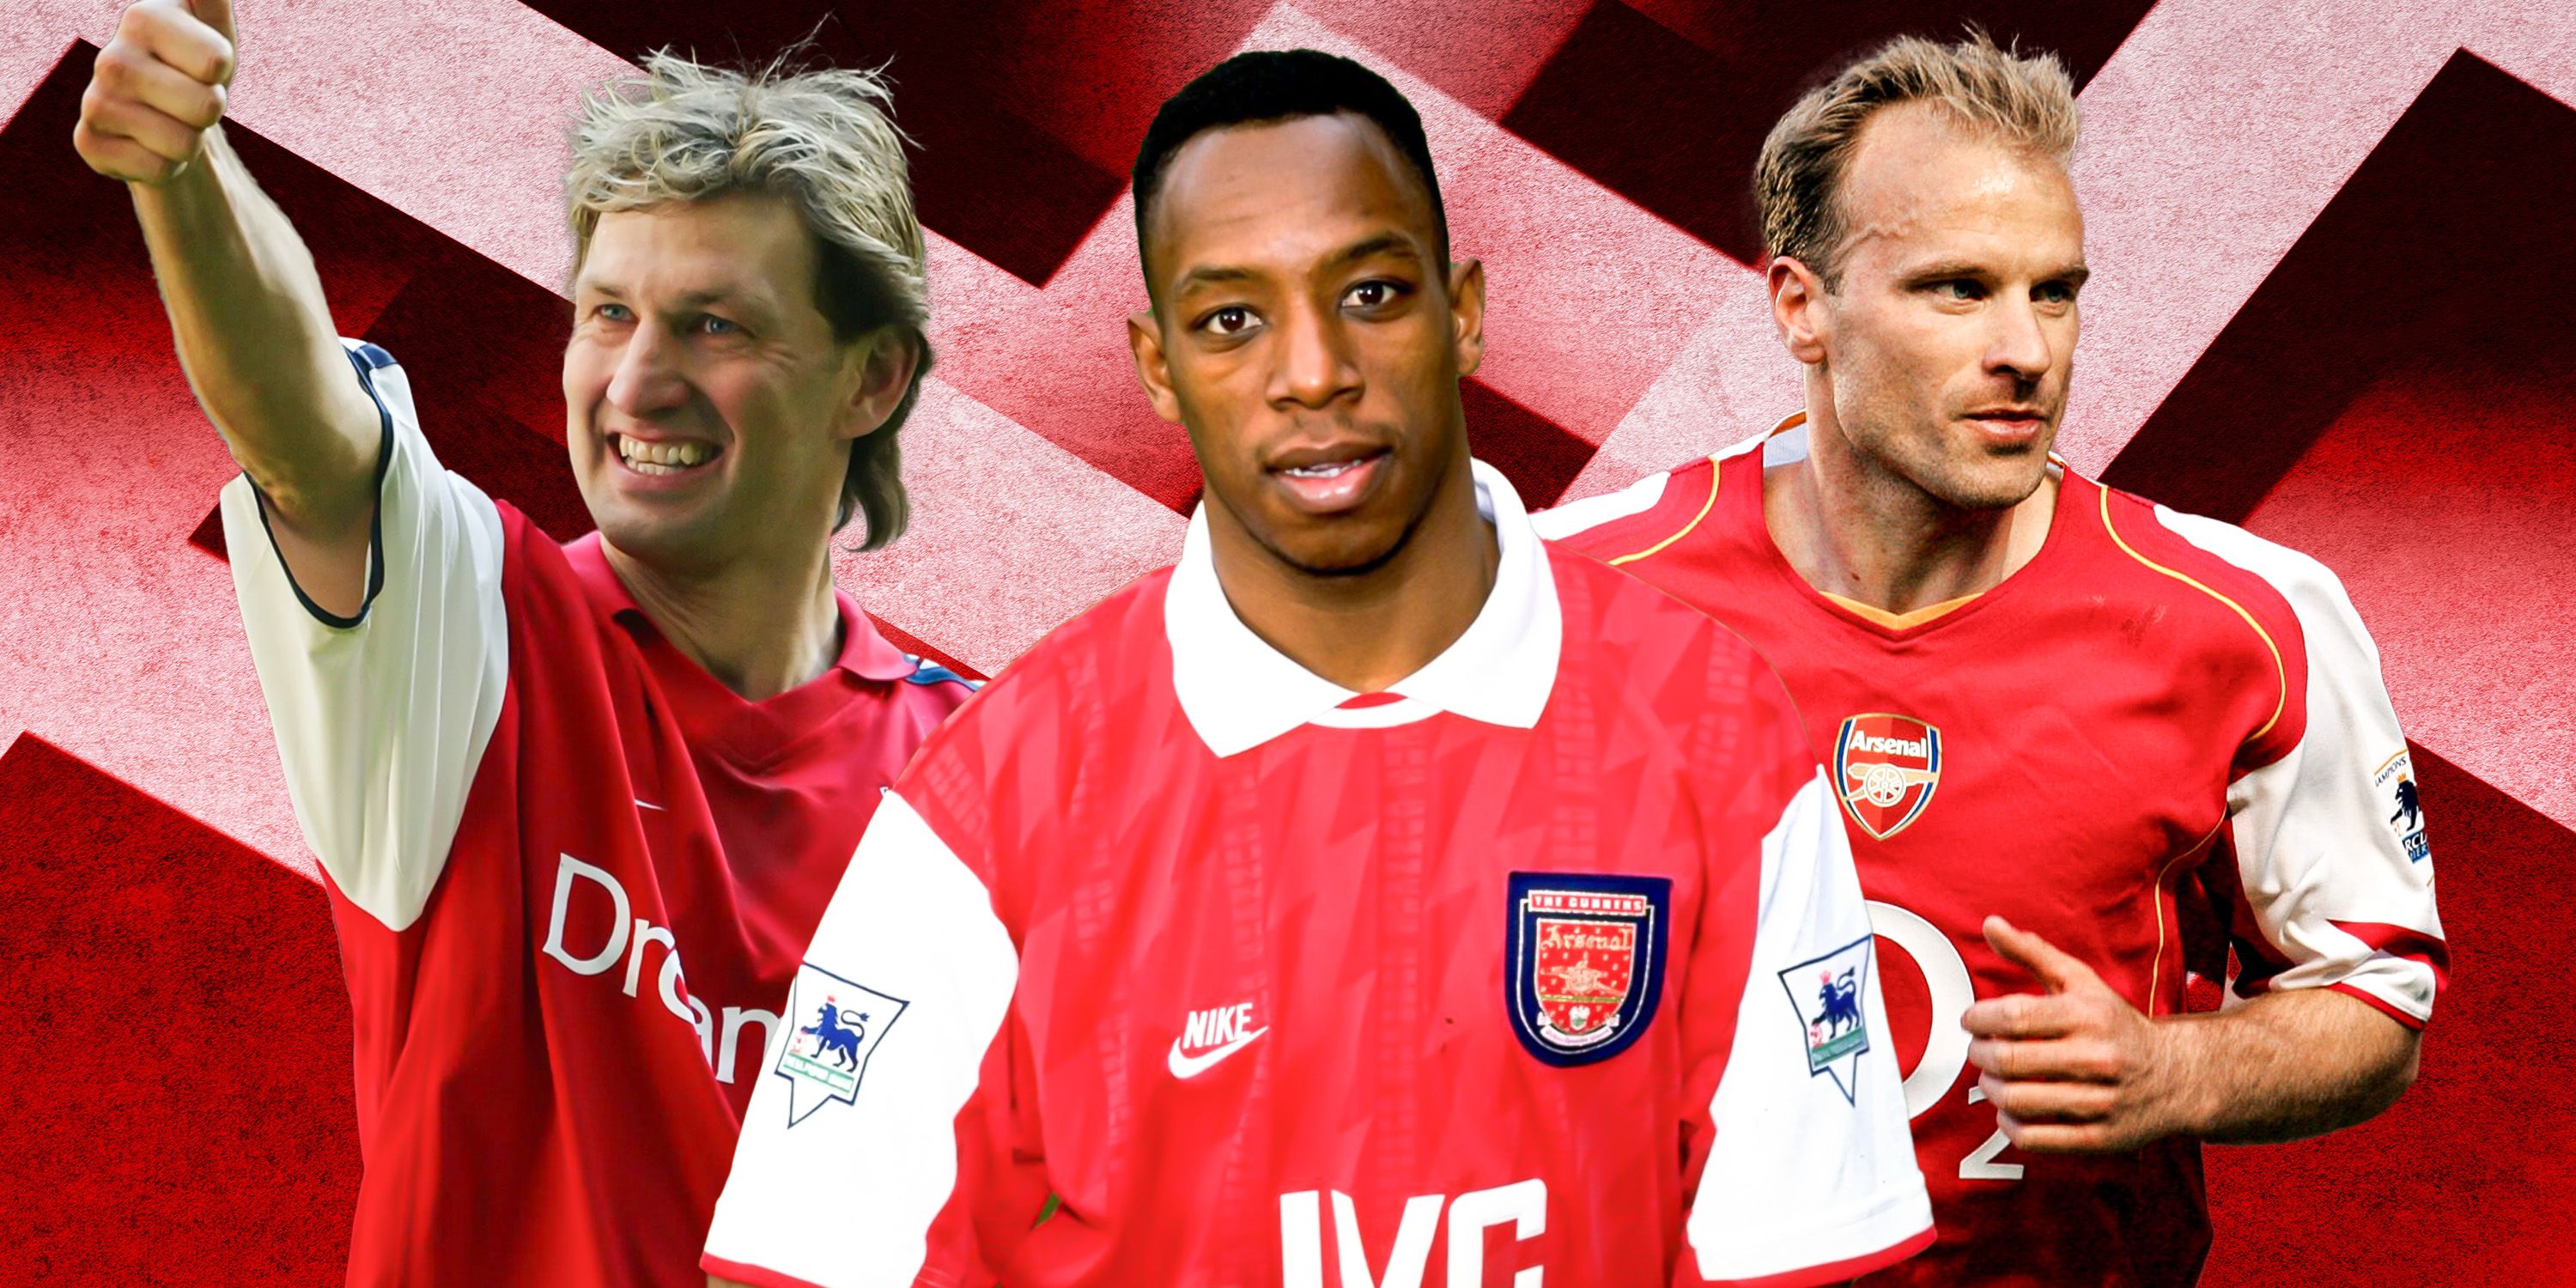 Ian Wright and on either side Dennis Bergkamp & Tony Adams all in Arsenal kit